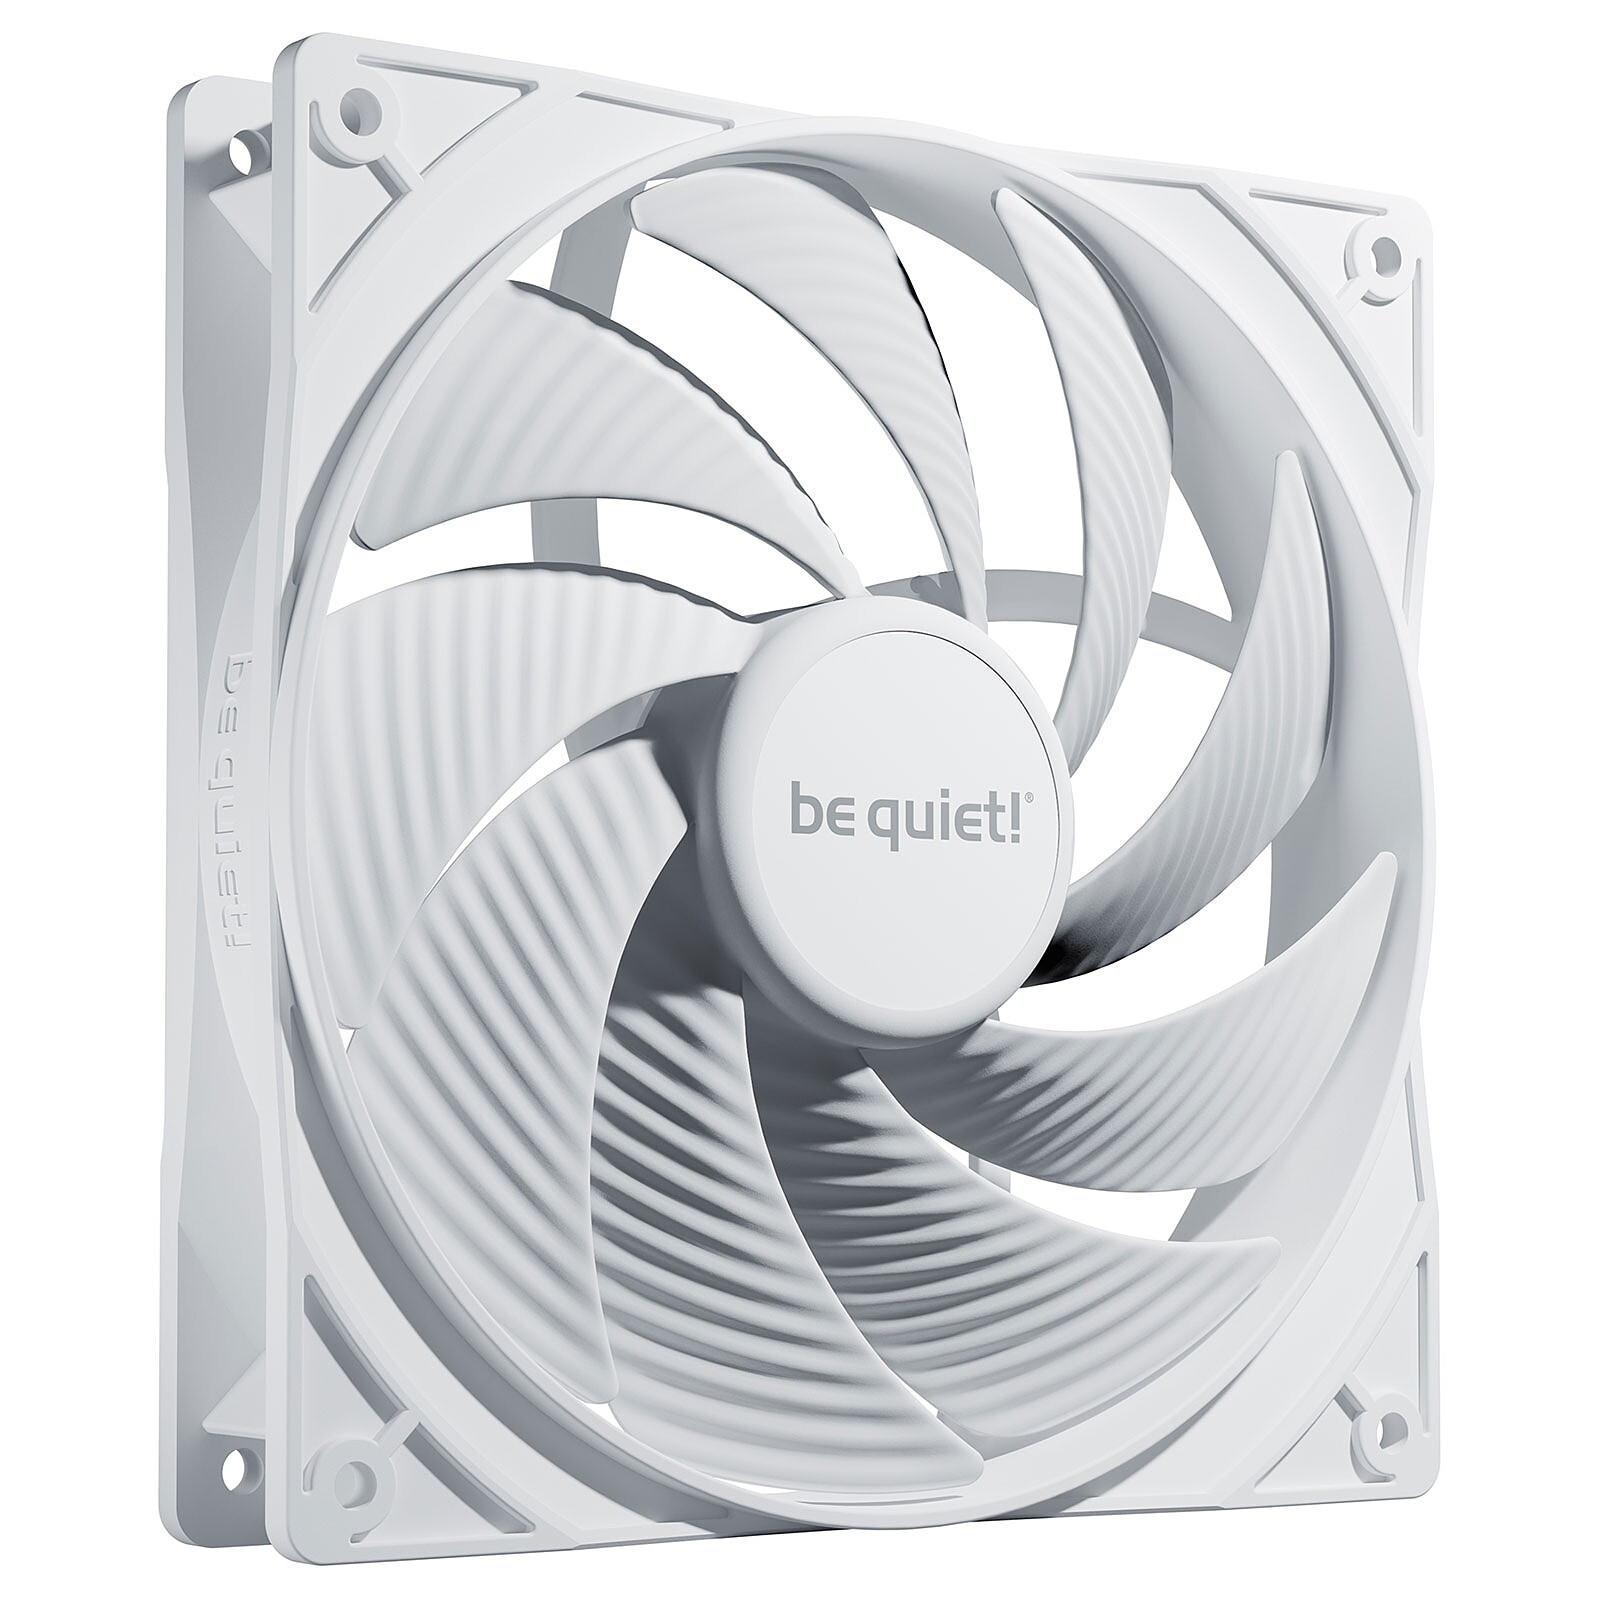 Acquista BeQuiet Pure Wings 2 140mm high-speed Ventola per PC case Nero (L  x A x P) 140 x 140 x 25 mm da Conrad